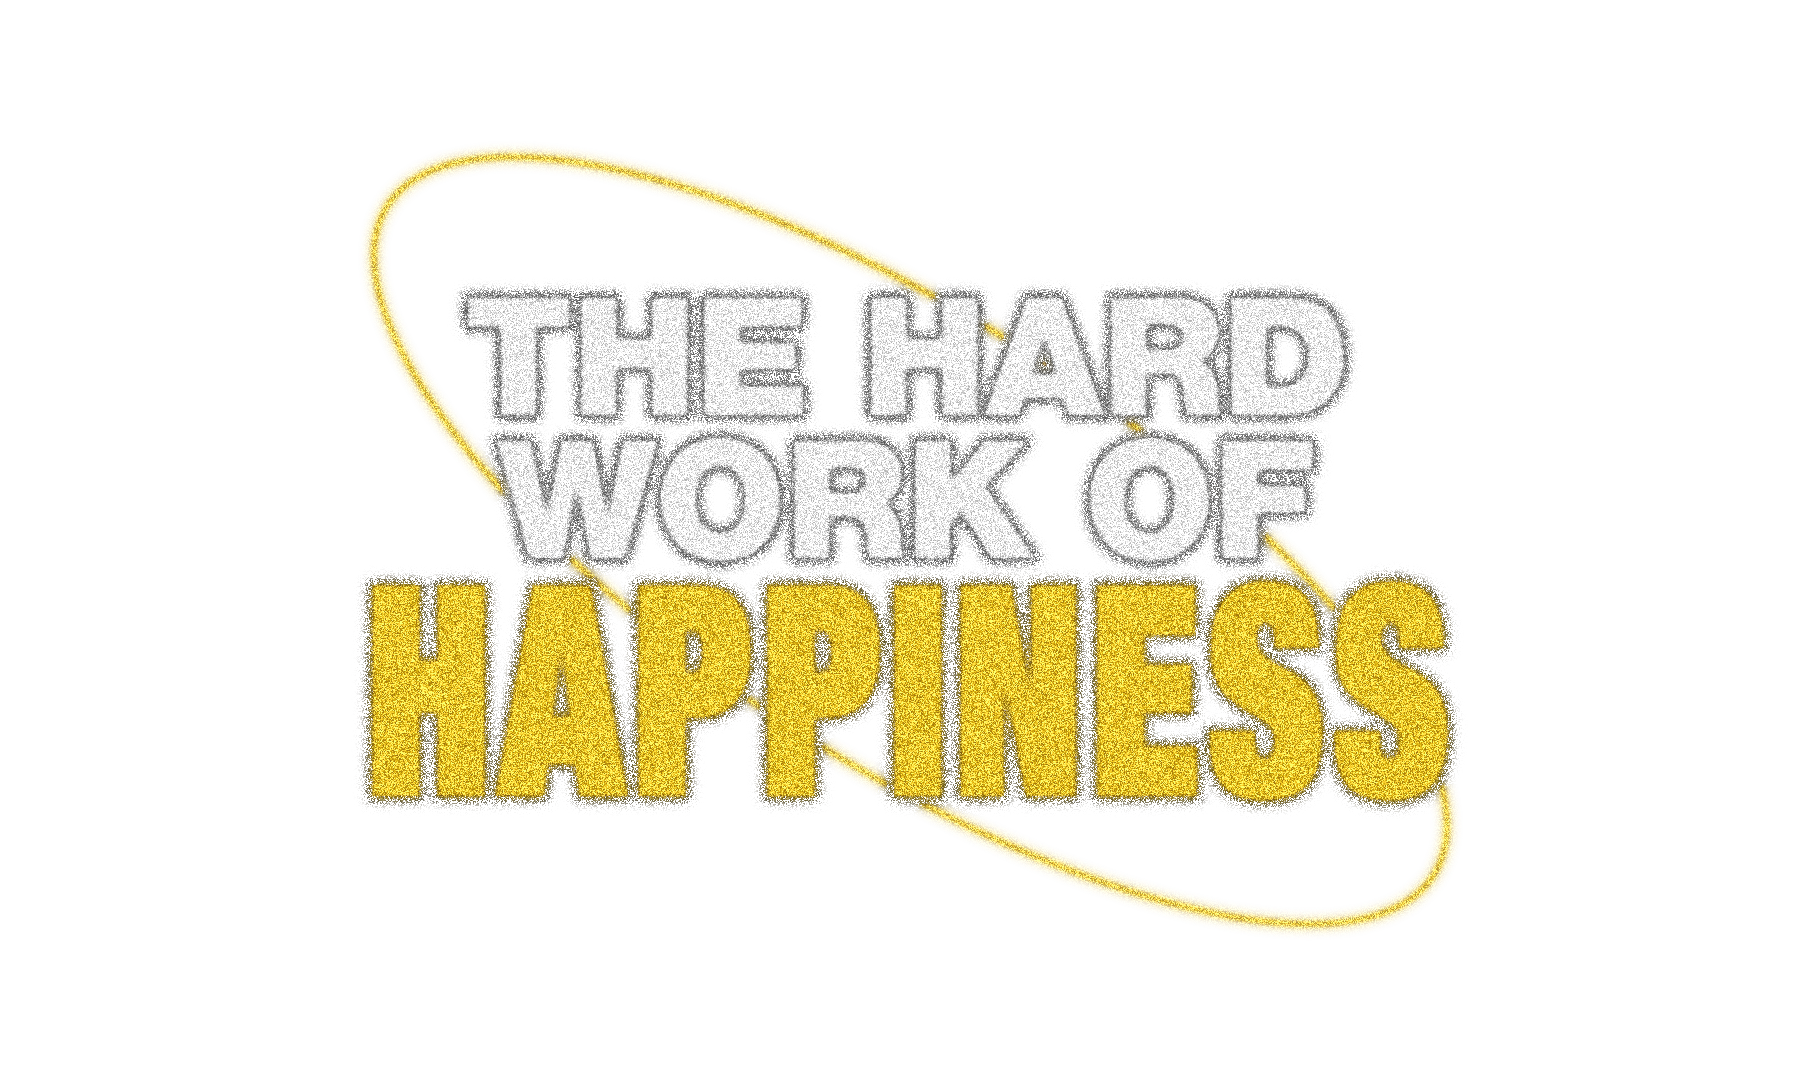 The Hard Work Of Happiness